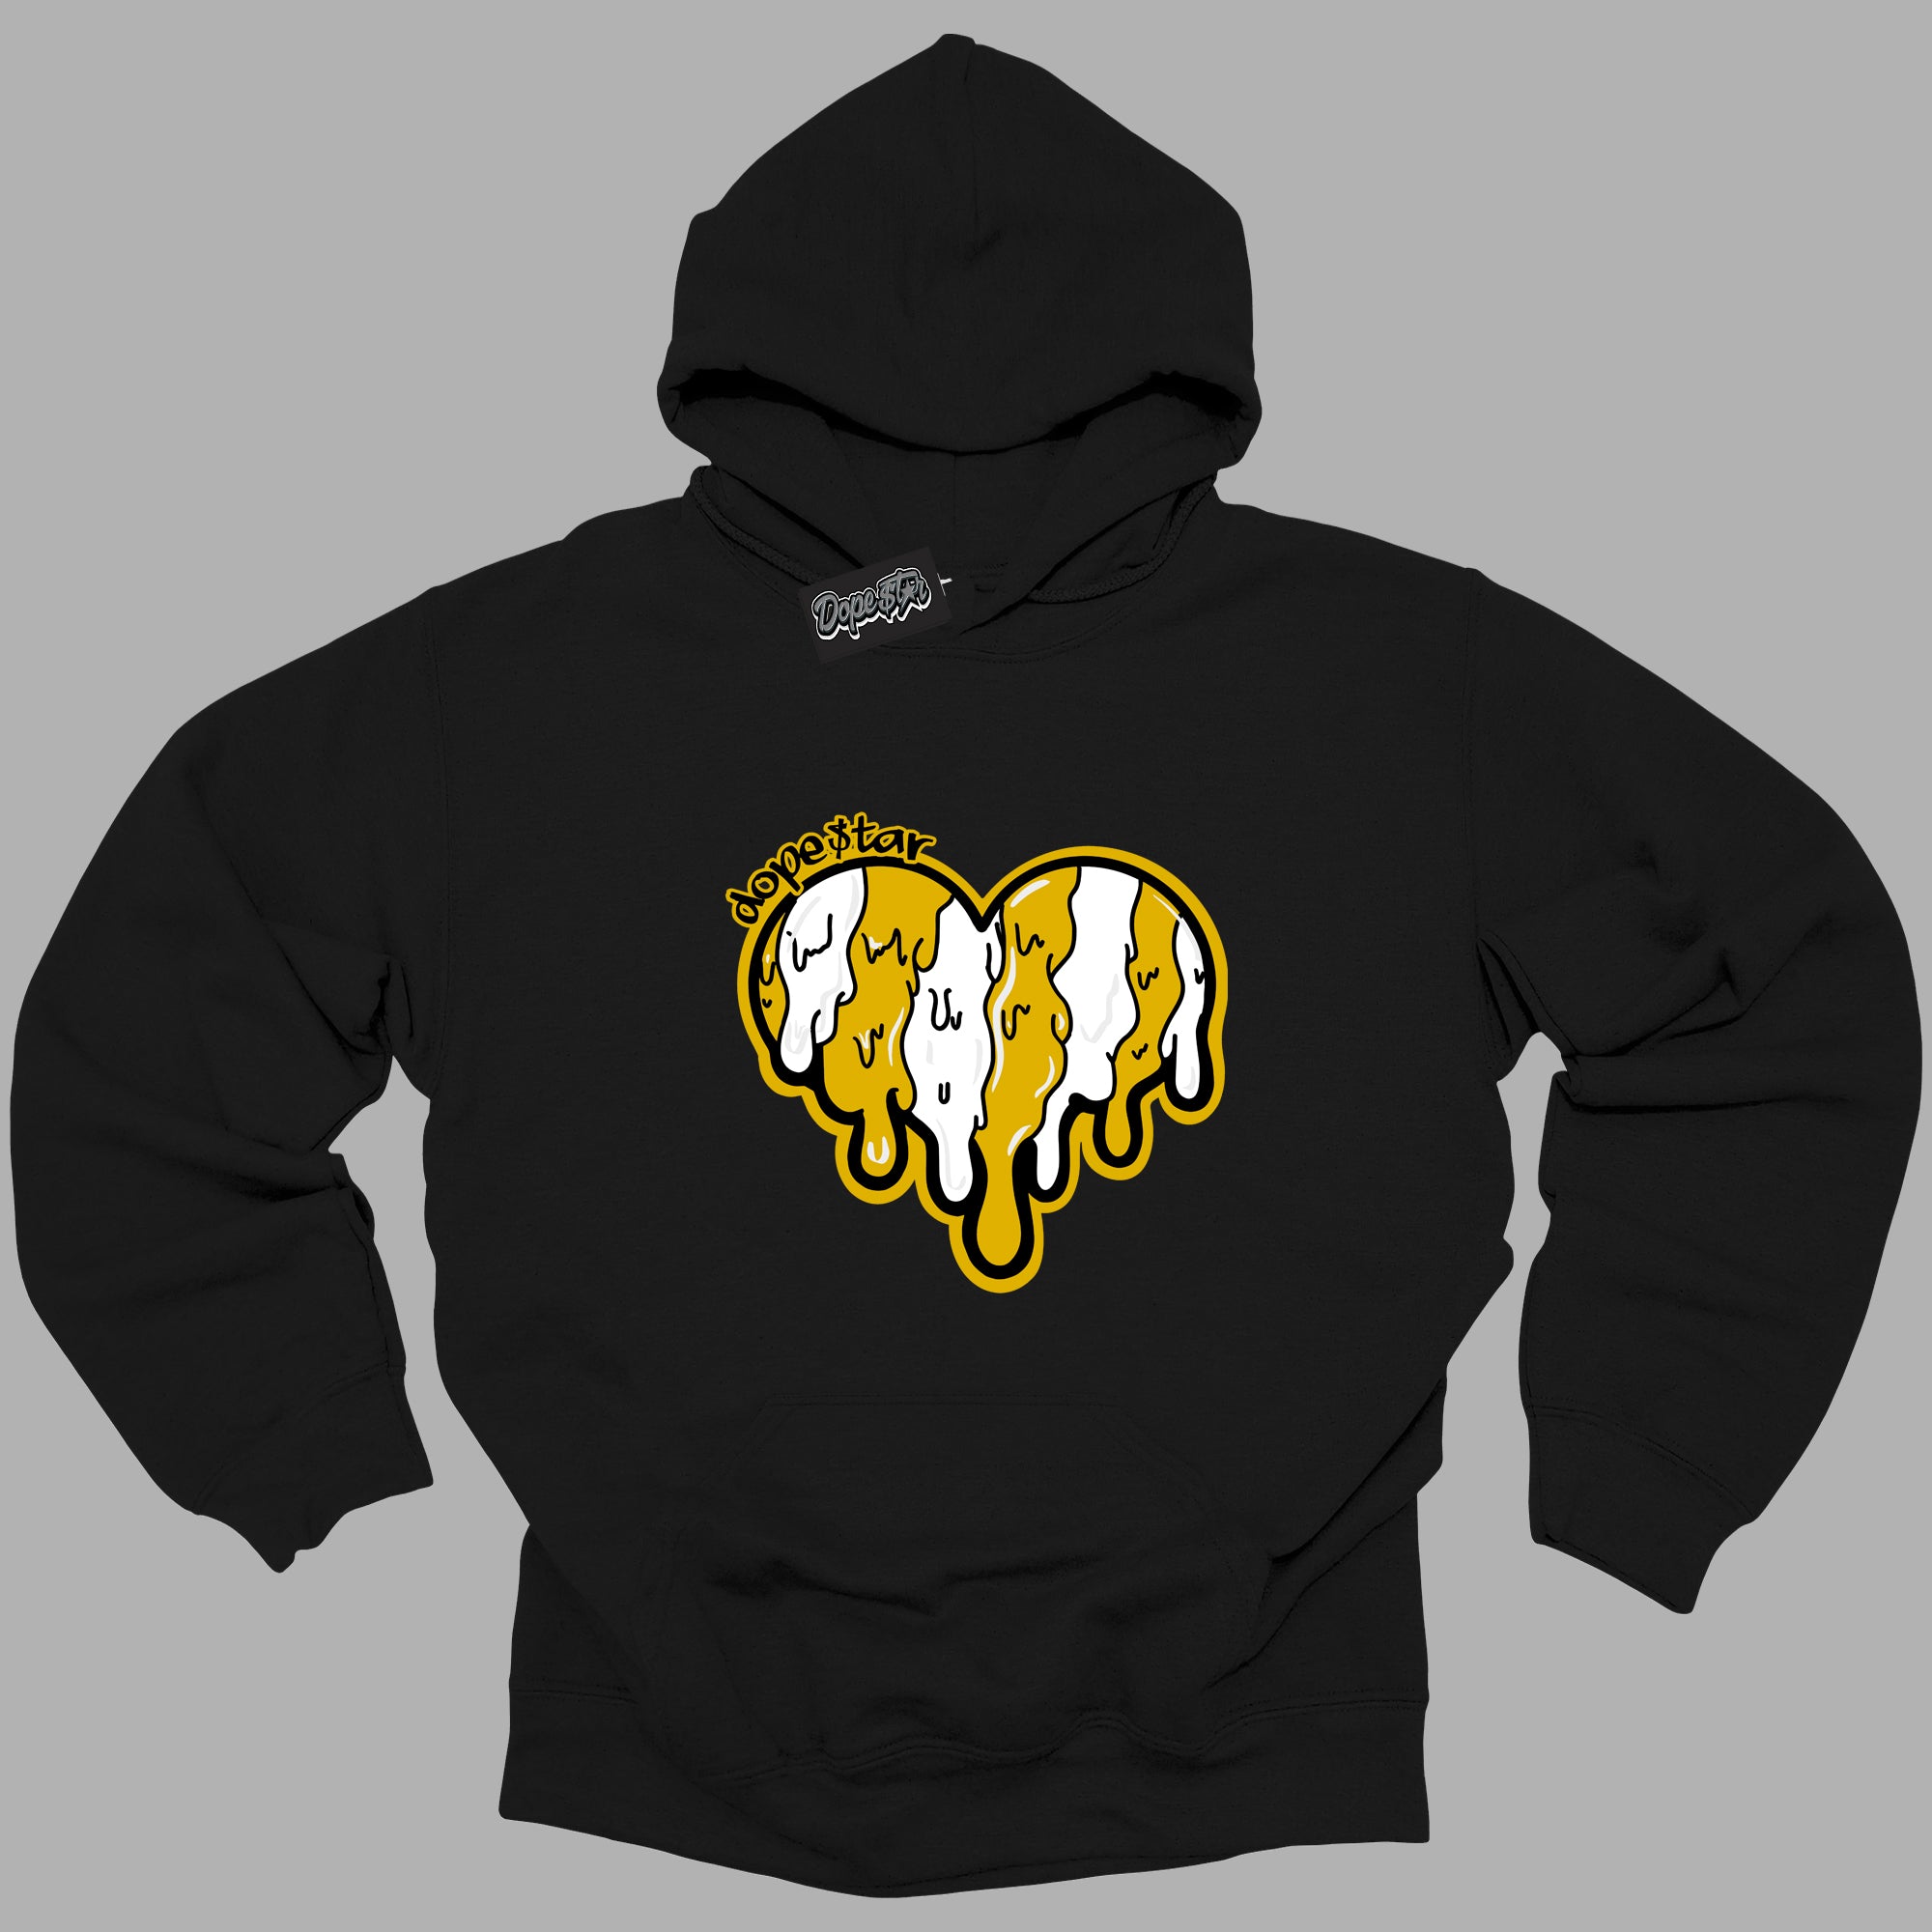 Cool Black Hoodie with “ Melting Heart ”  design that Perfectly Matches Yellow Ochre 6s Sneakers.